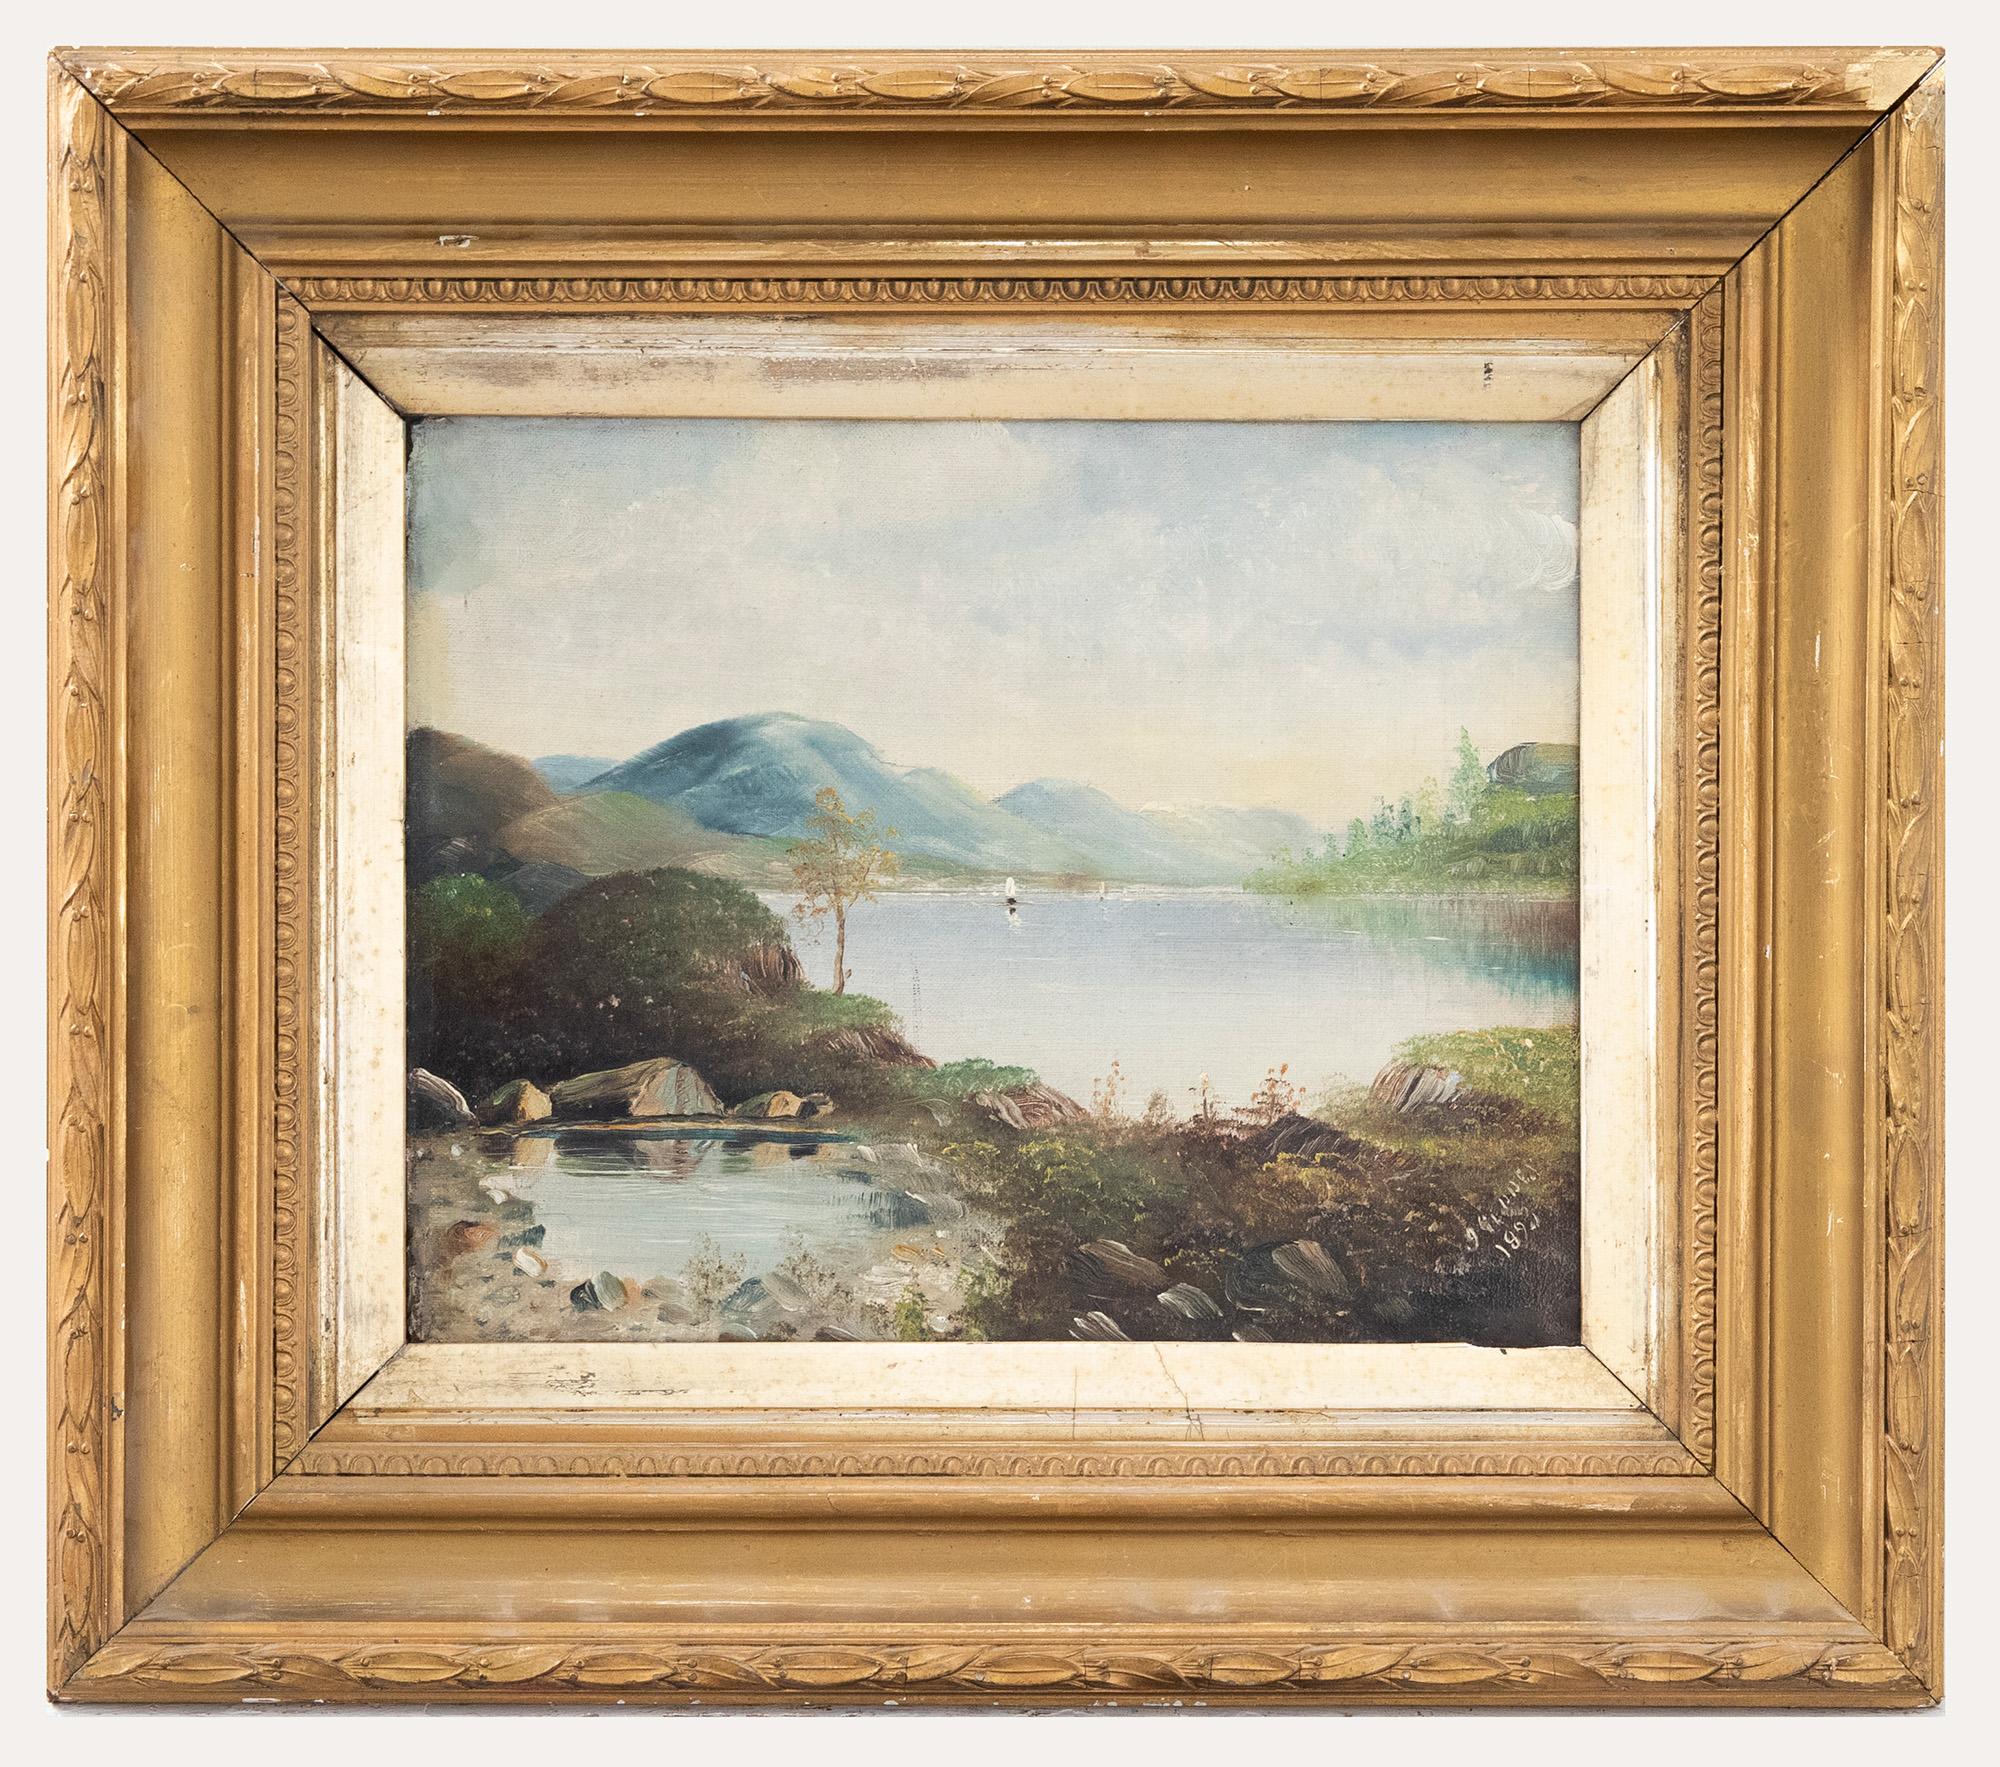 Unknown Landscape Painting - J. Geddes - Framed Late 19th Century Oil, Still Waters